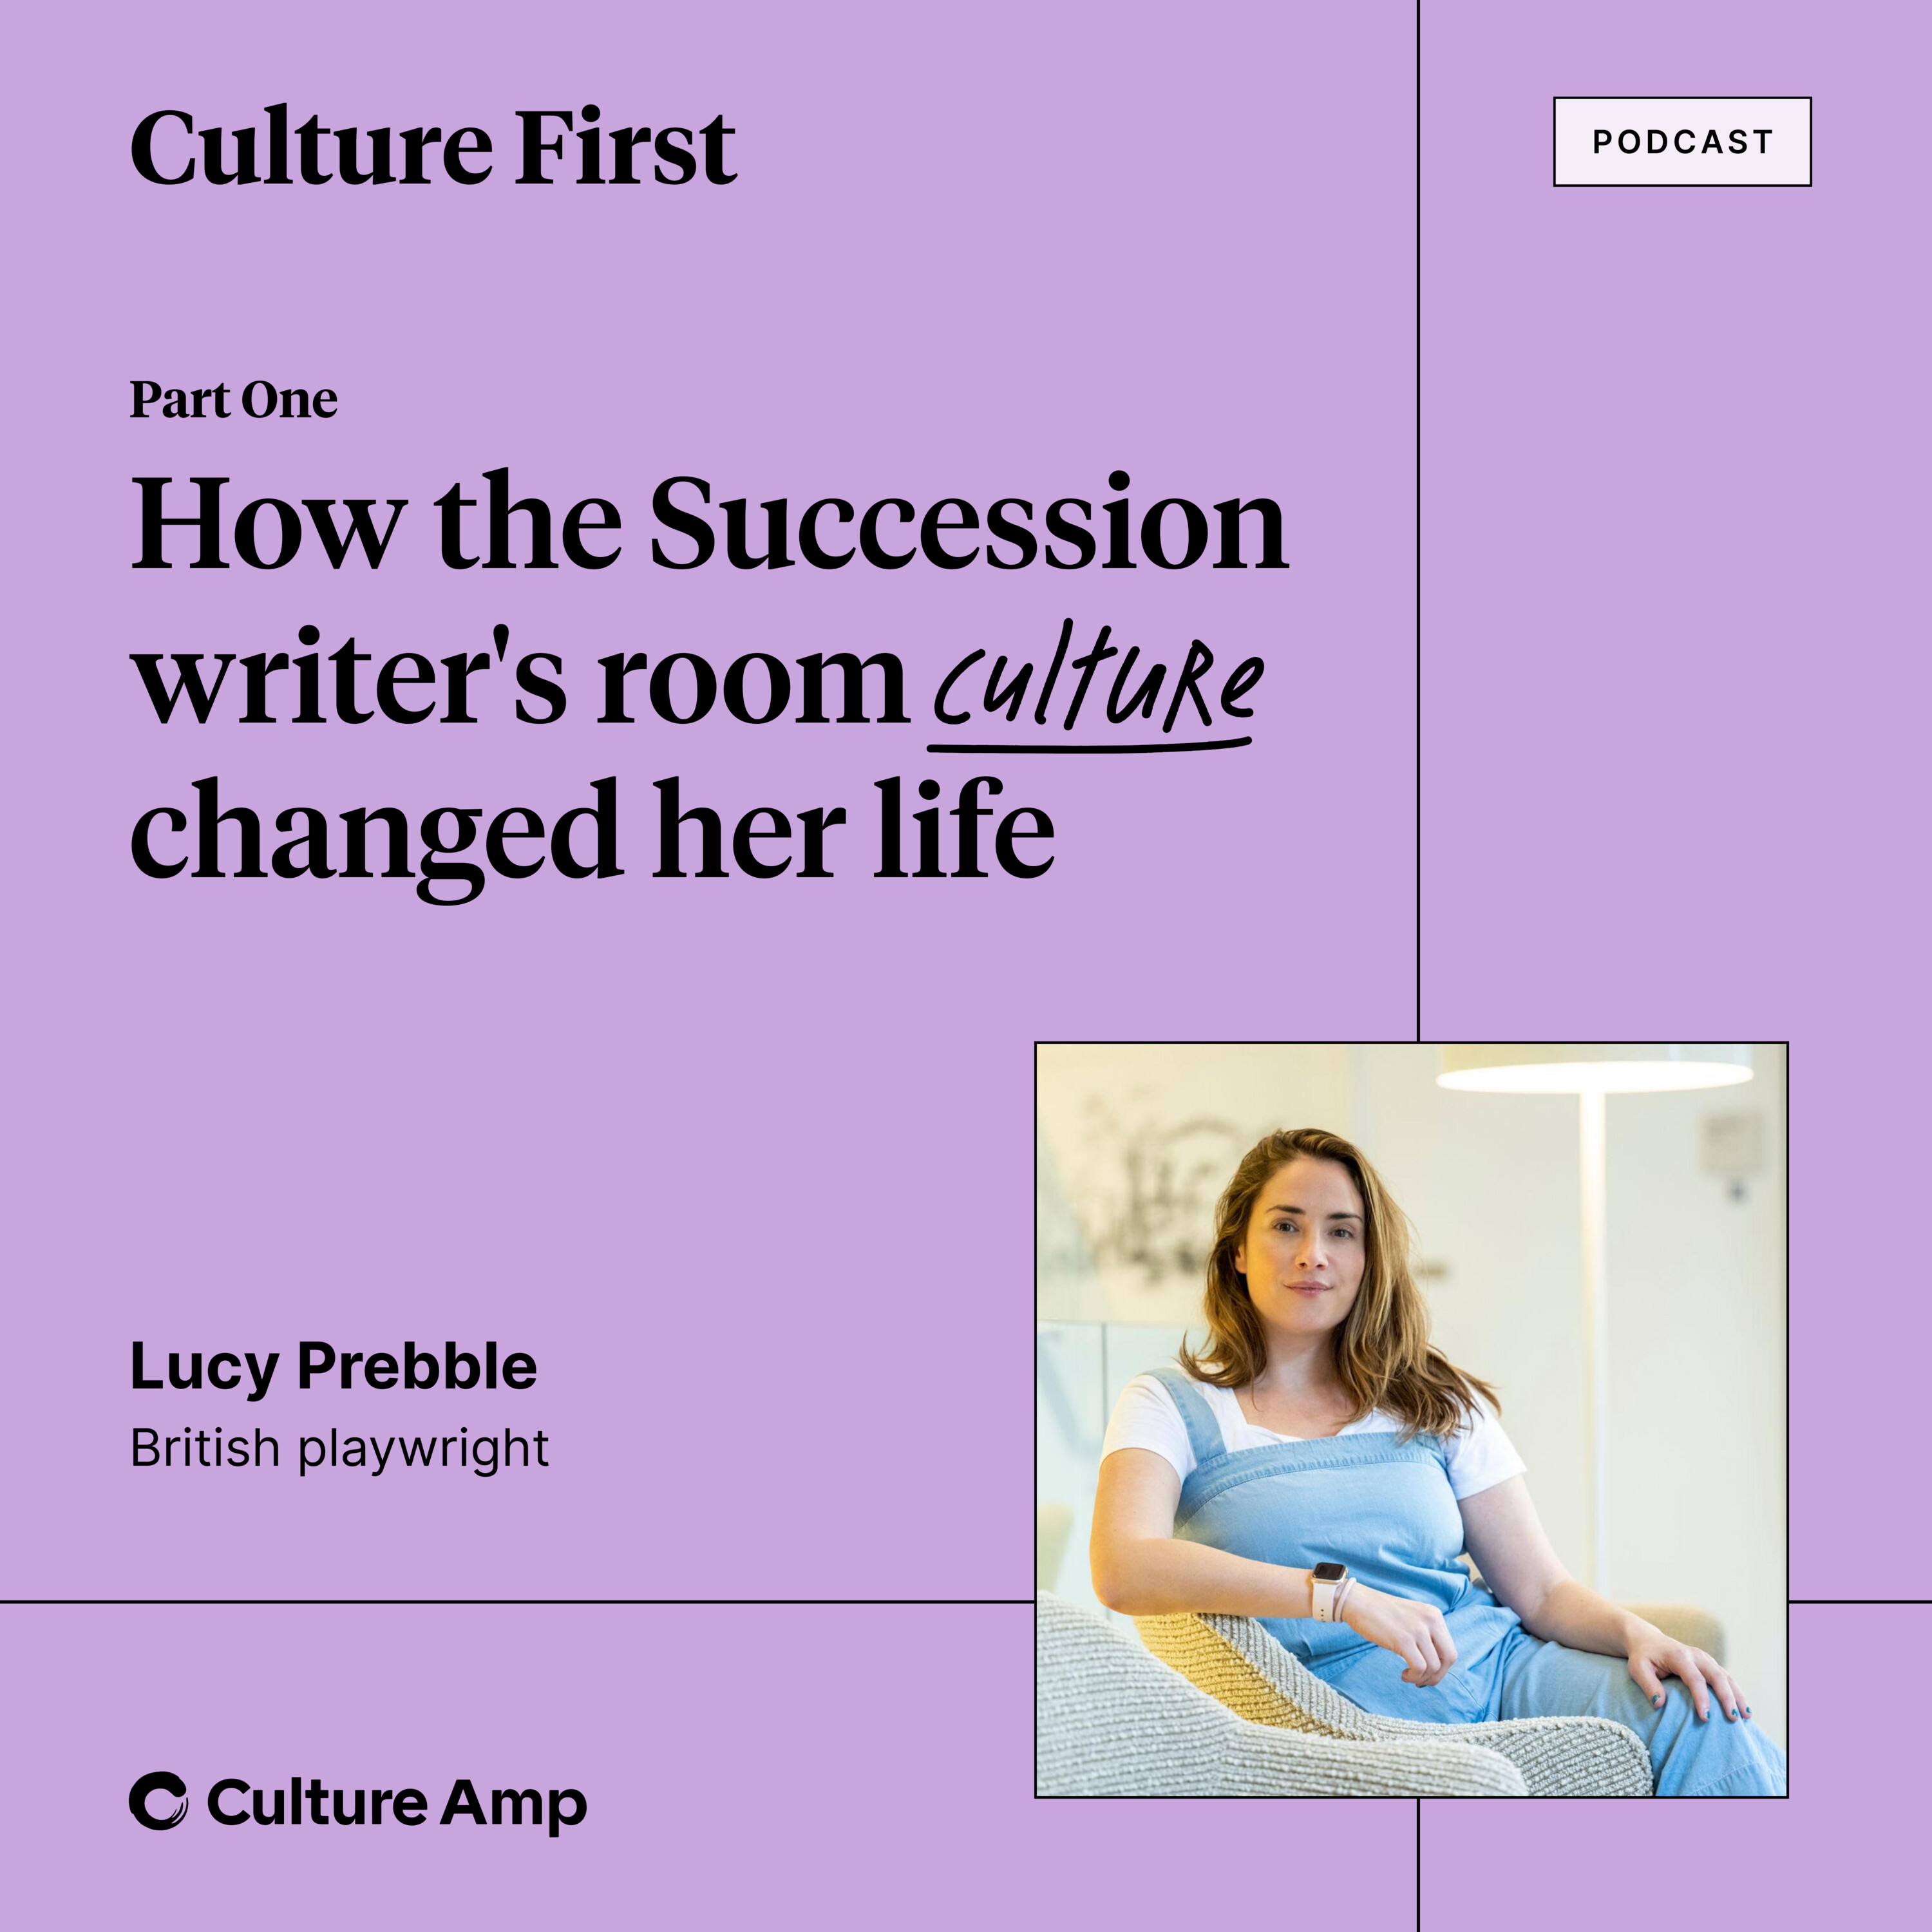 Lucy Prebble: How the Succession writer's room culture changed her life - Part I